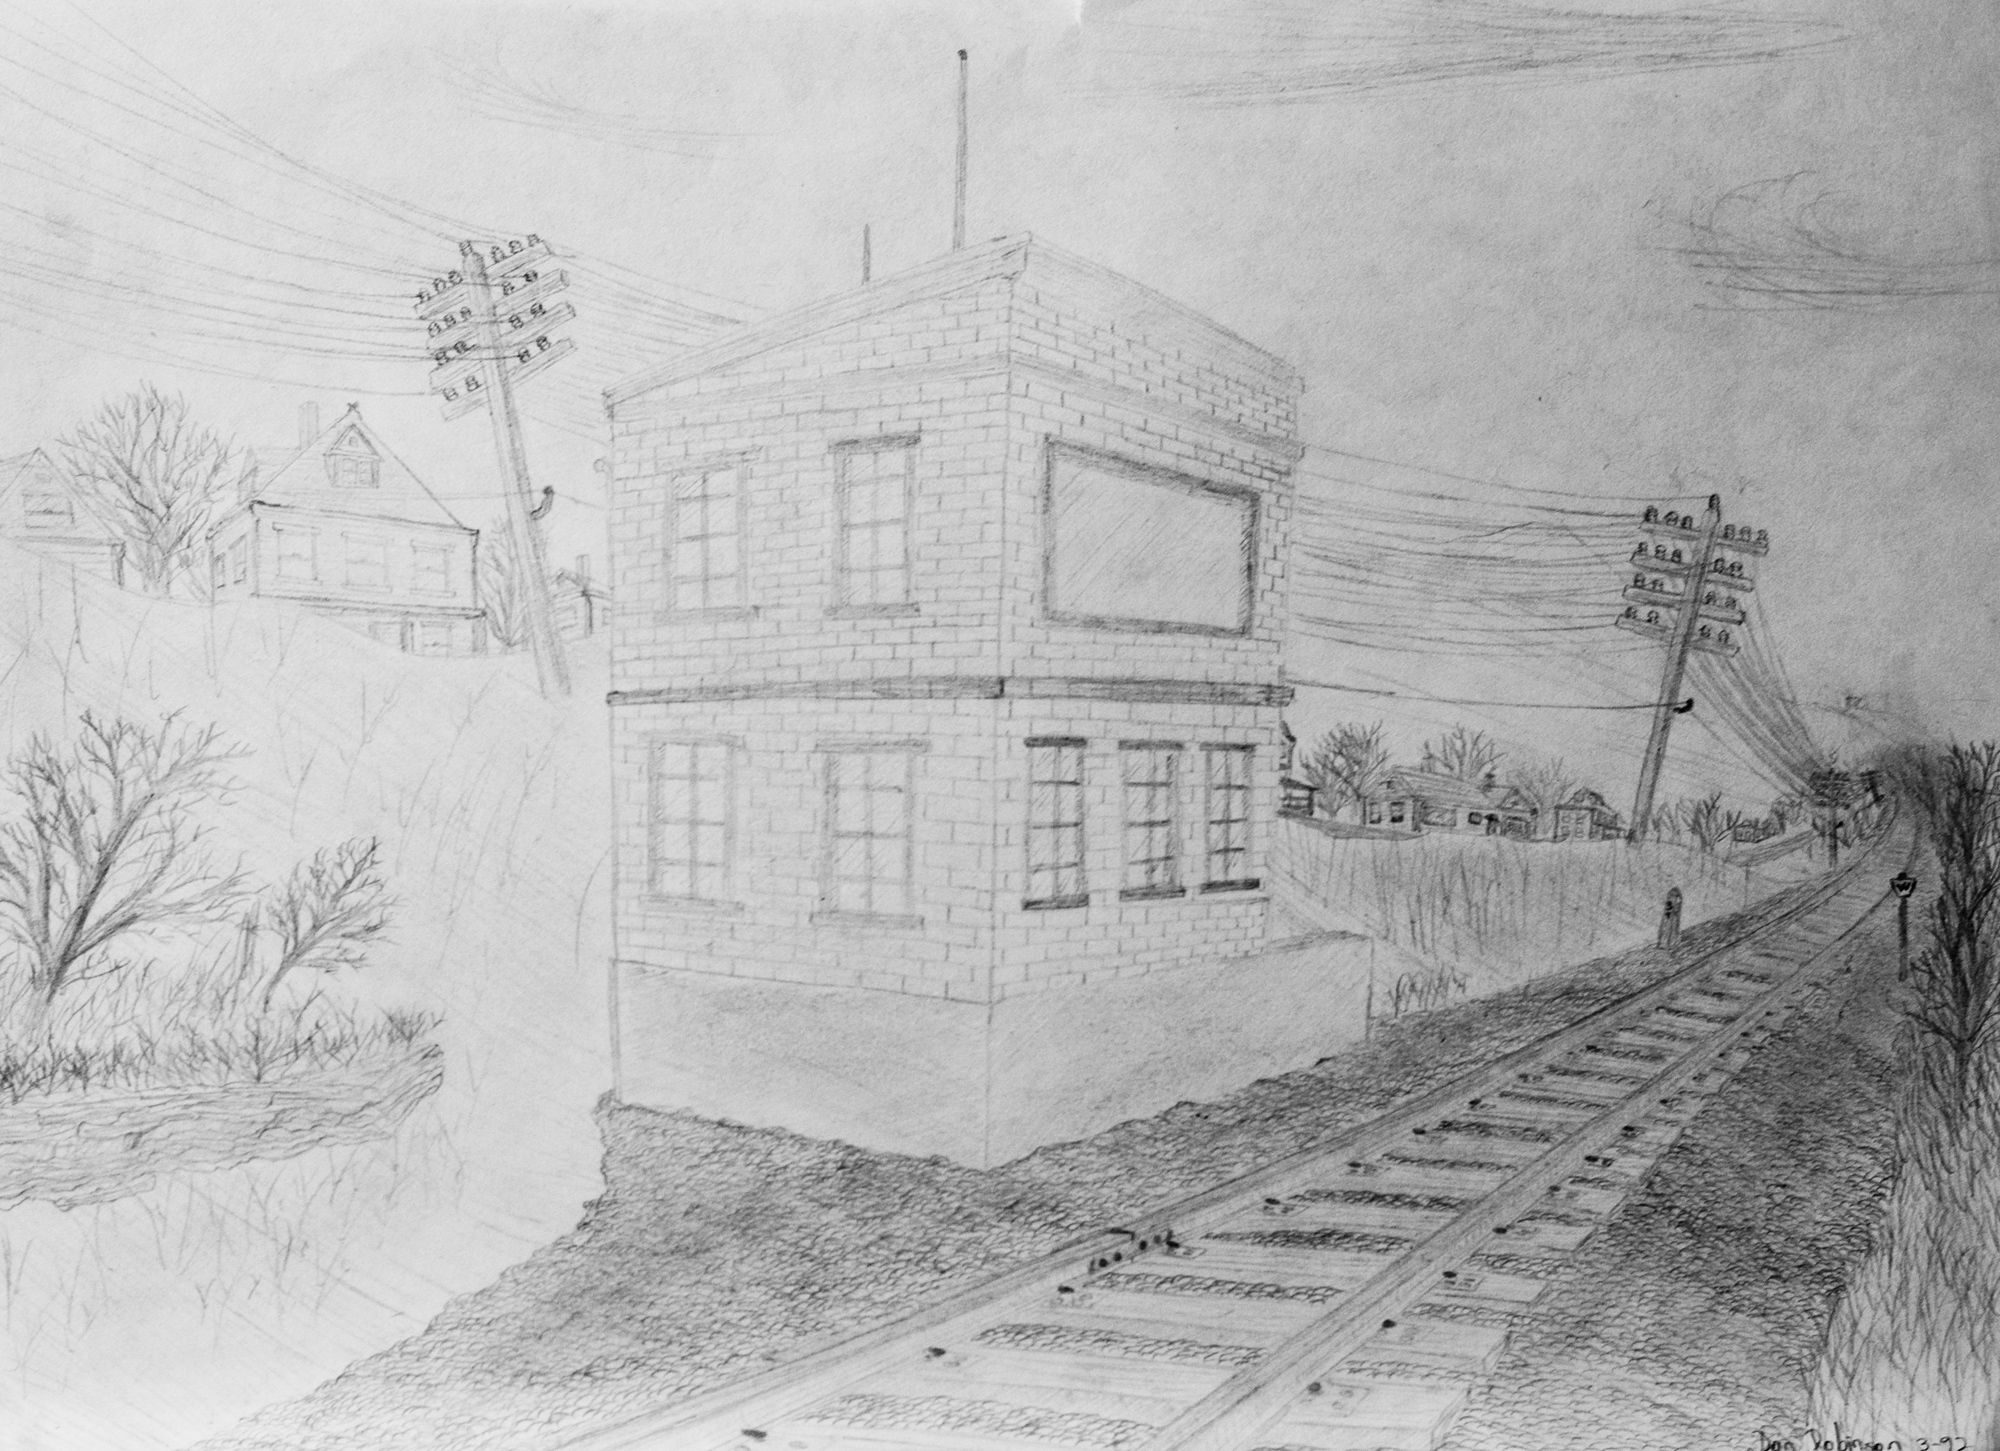 Old Baltimore and Ohio railroad signal tower cabin in Washington, PA pencil sketch